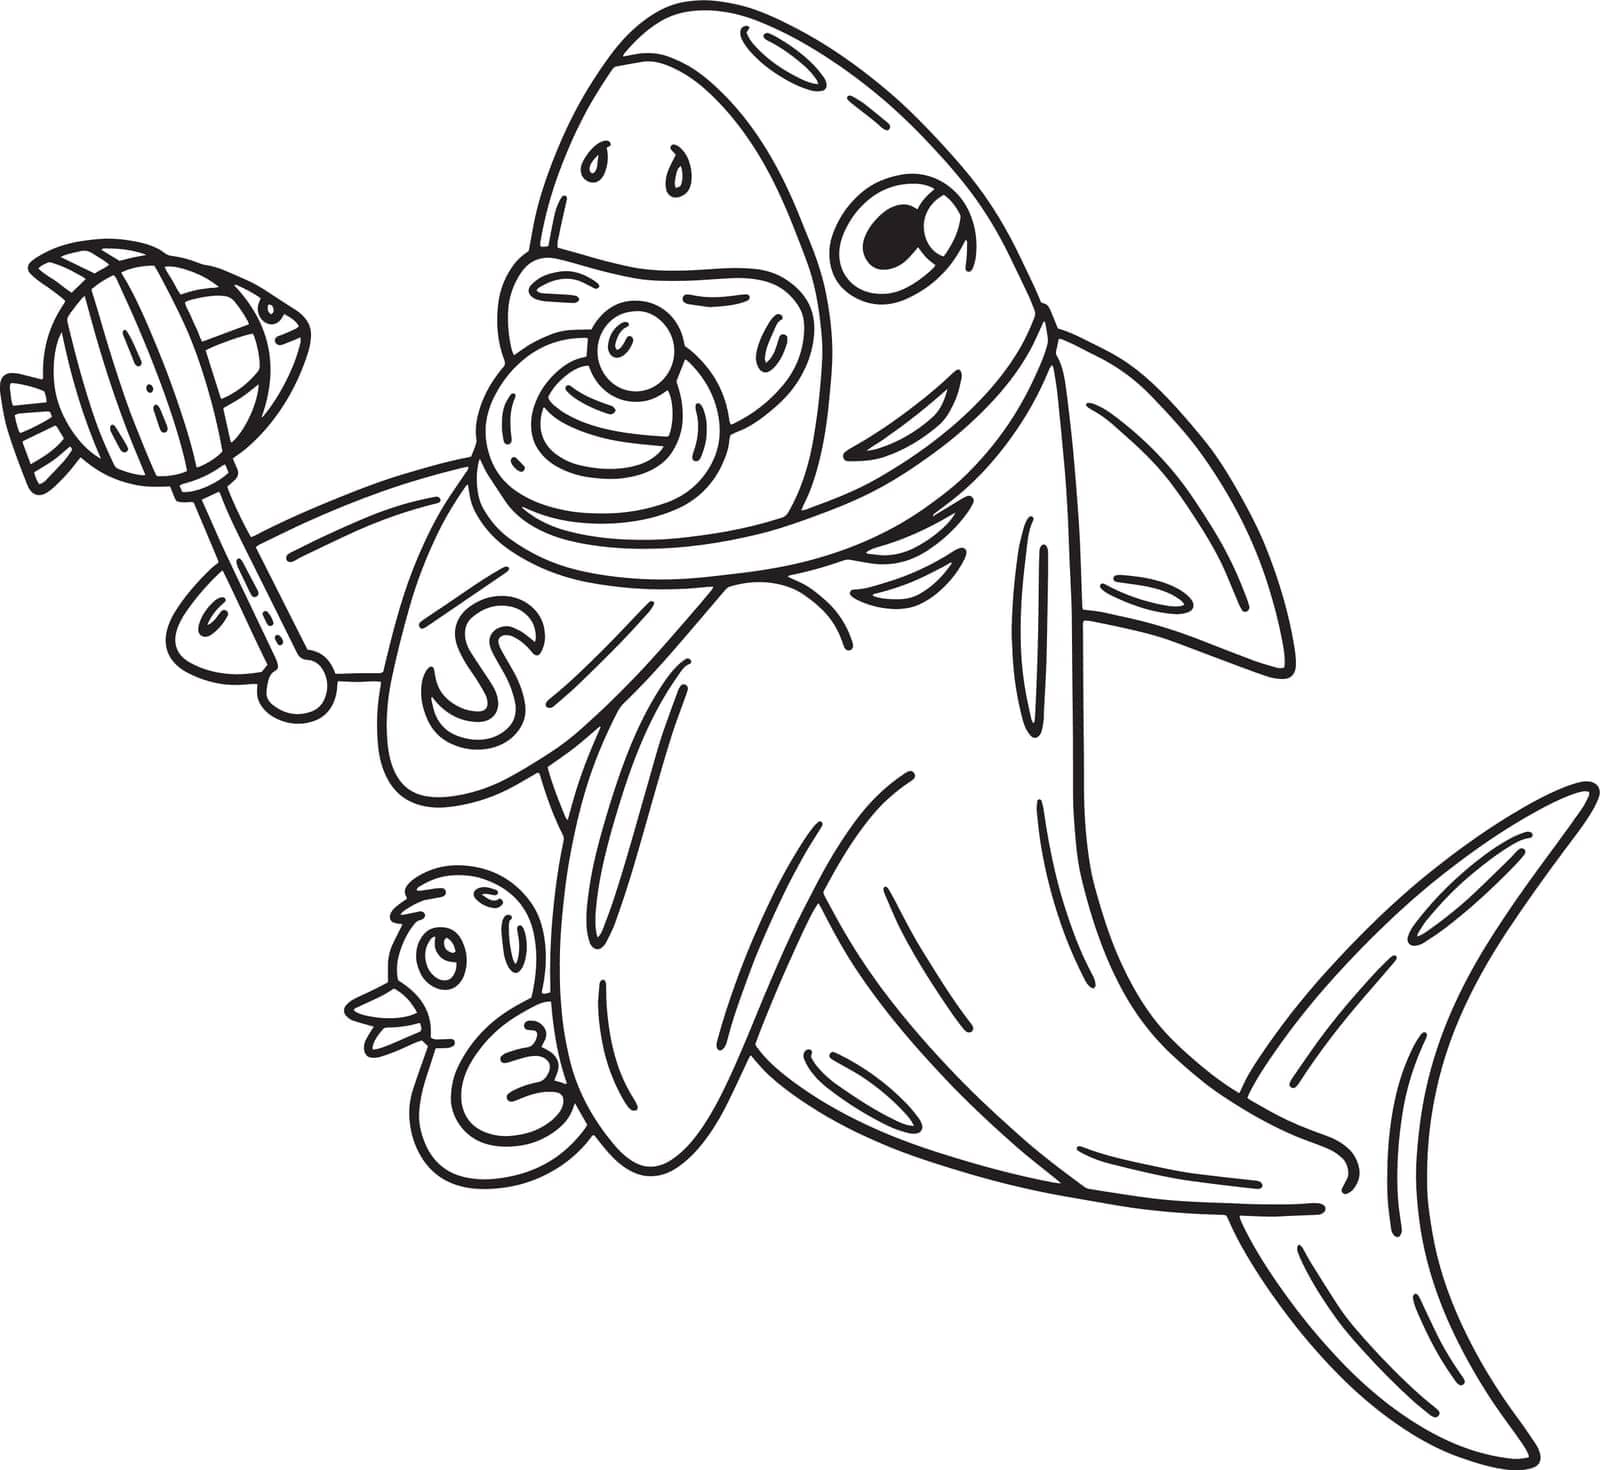 Baby Shark Isolated Coloring Page for Kids by abbydesign